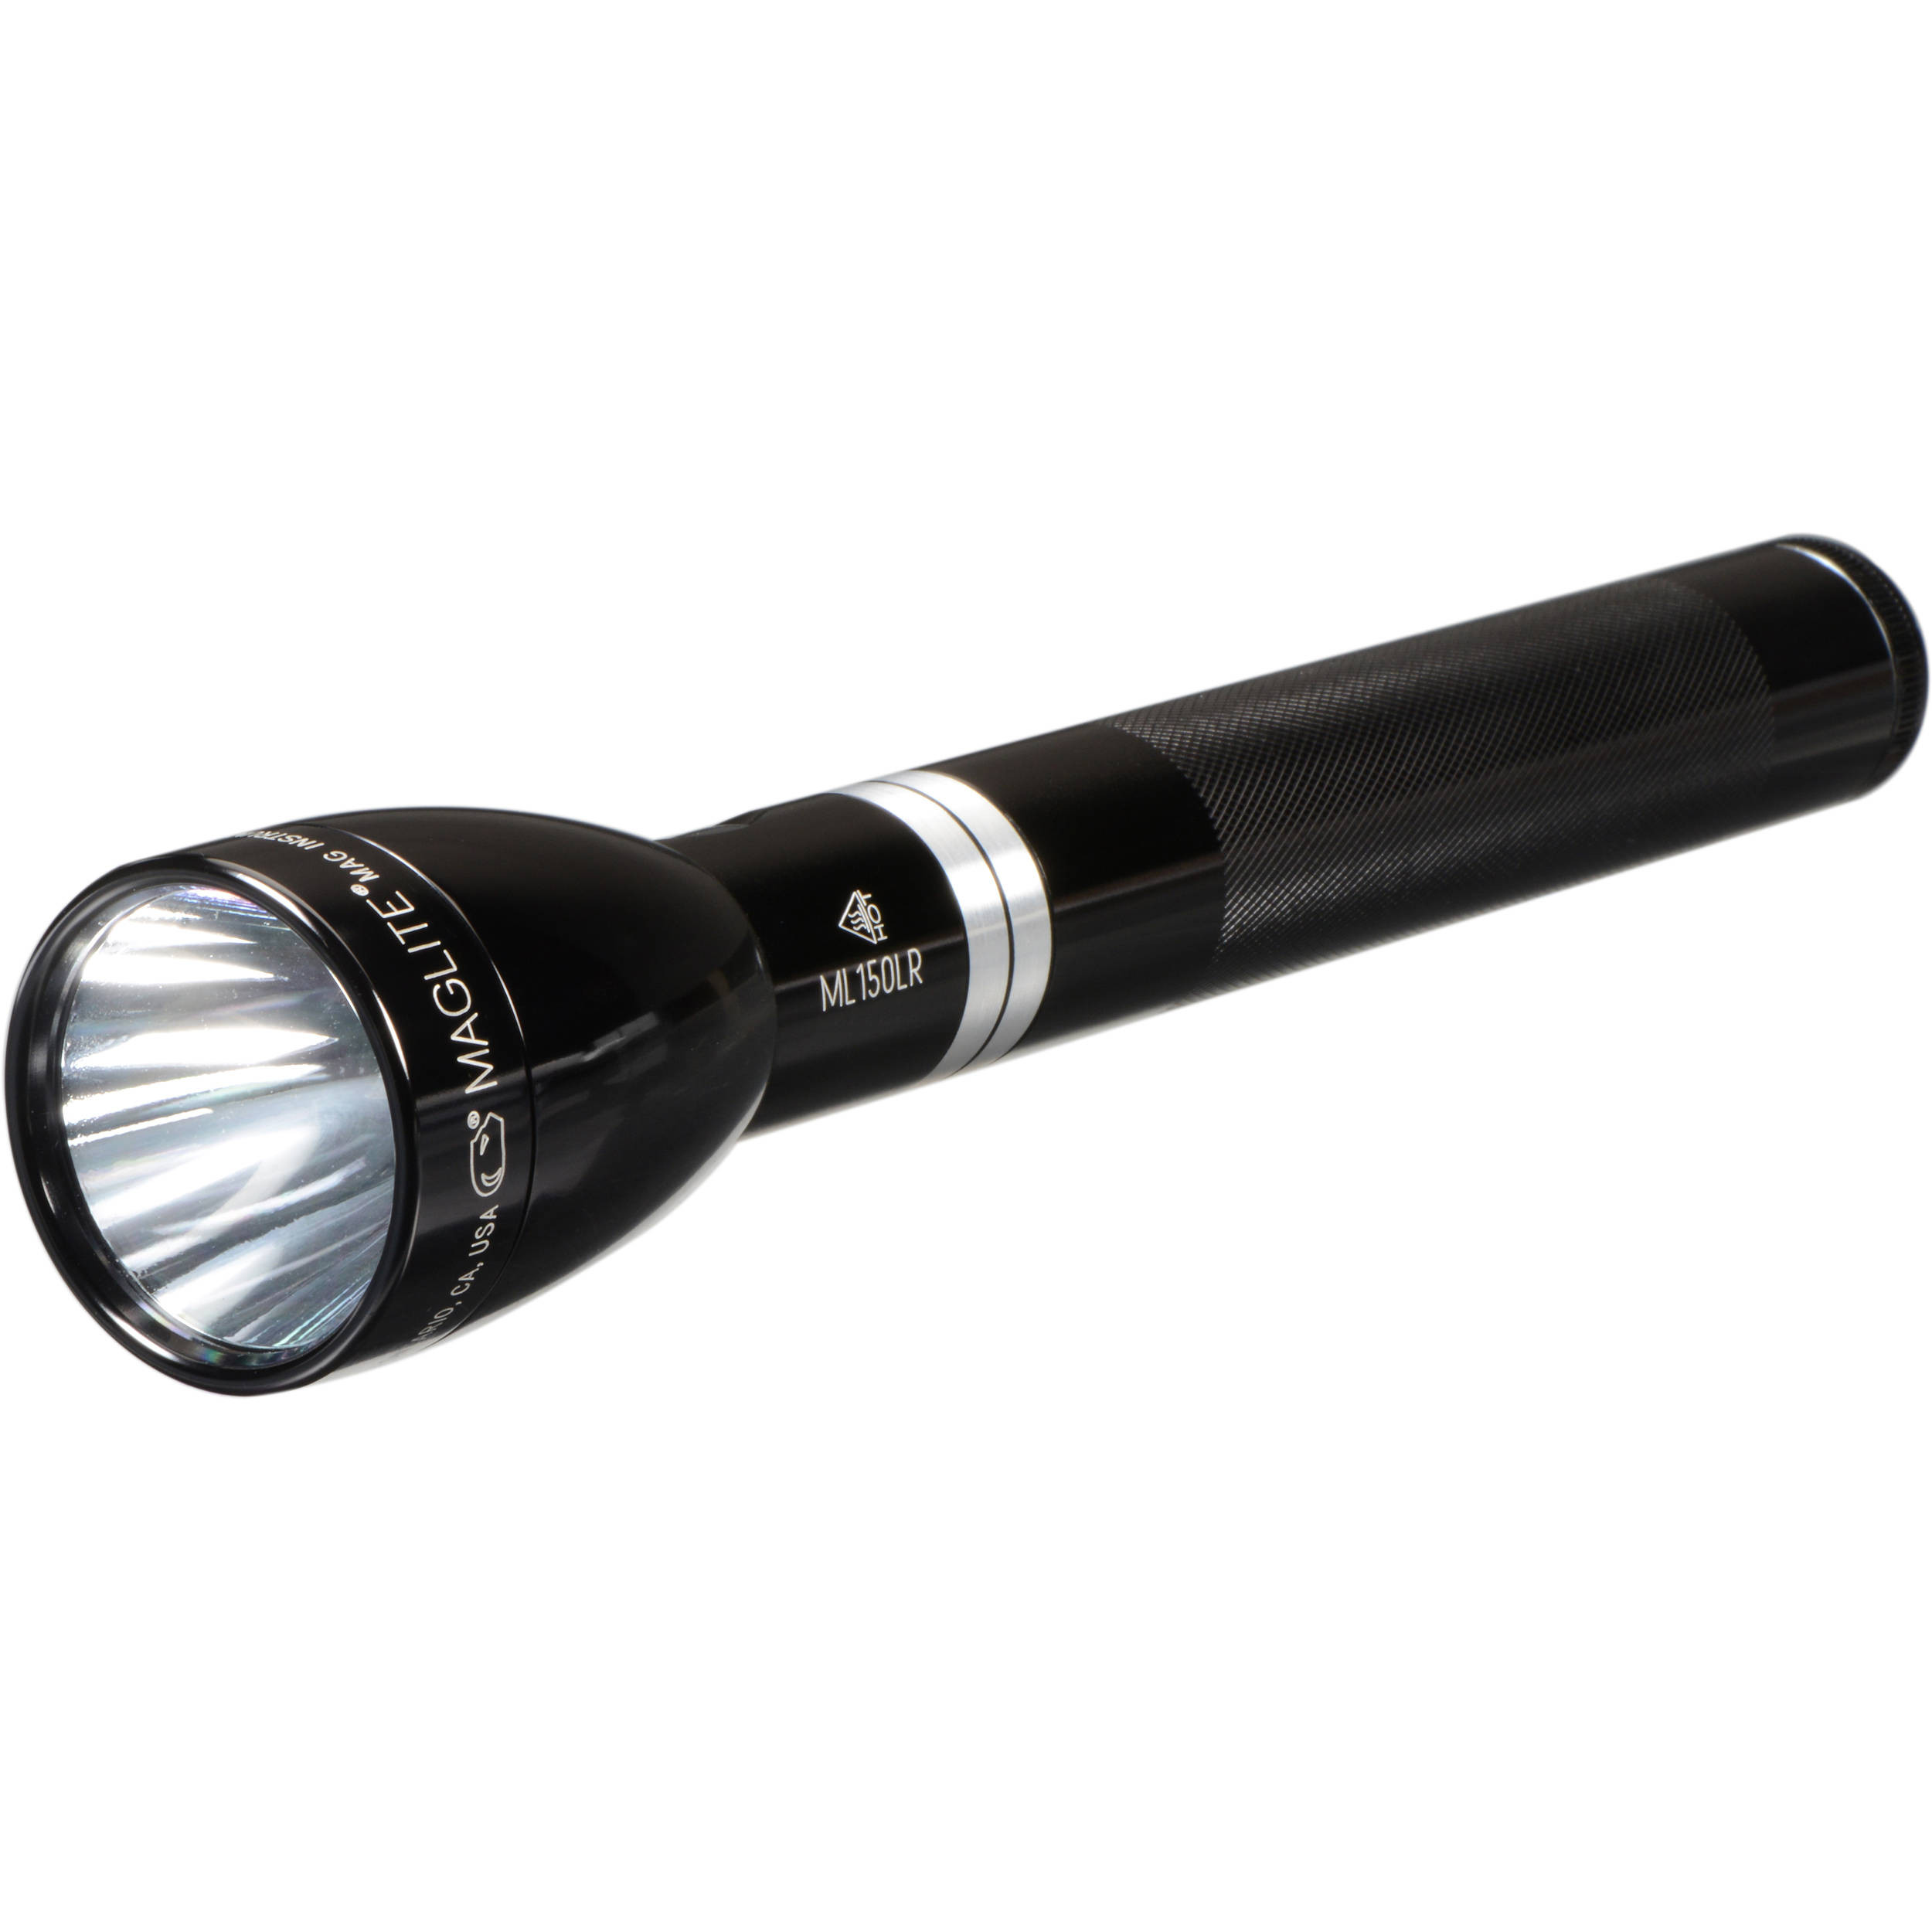 MAGLITE ML150LR LED RECHARGEABLE 1082 LUMENS